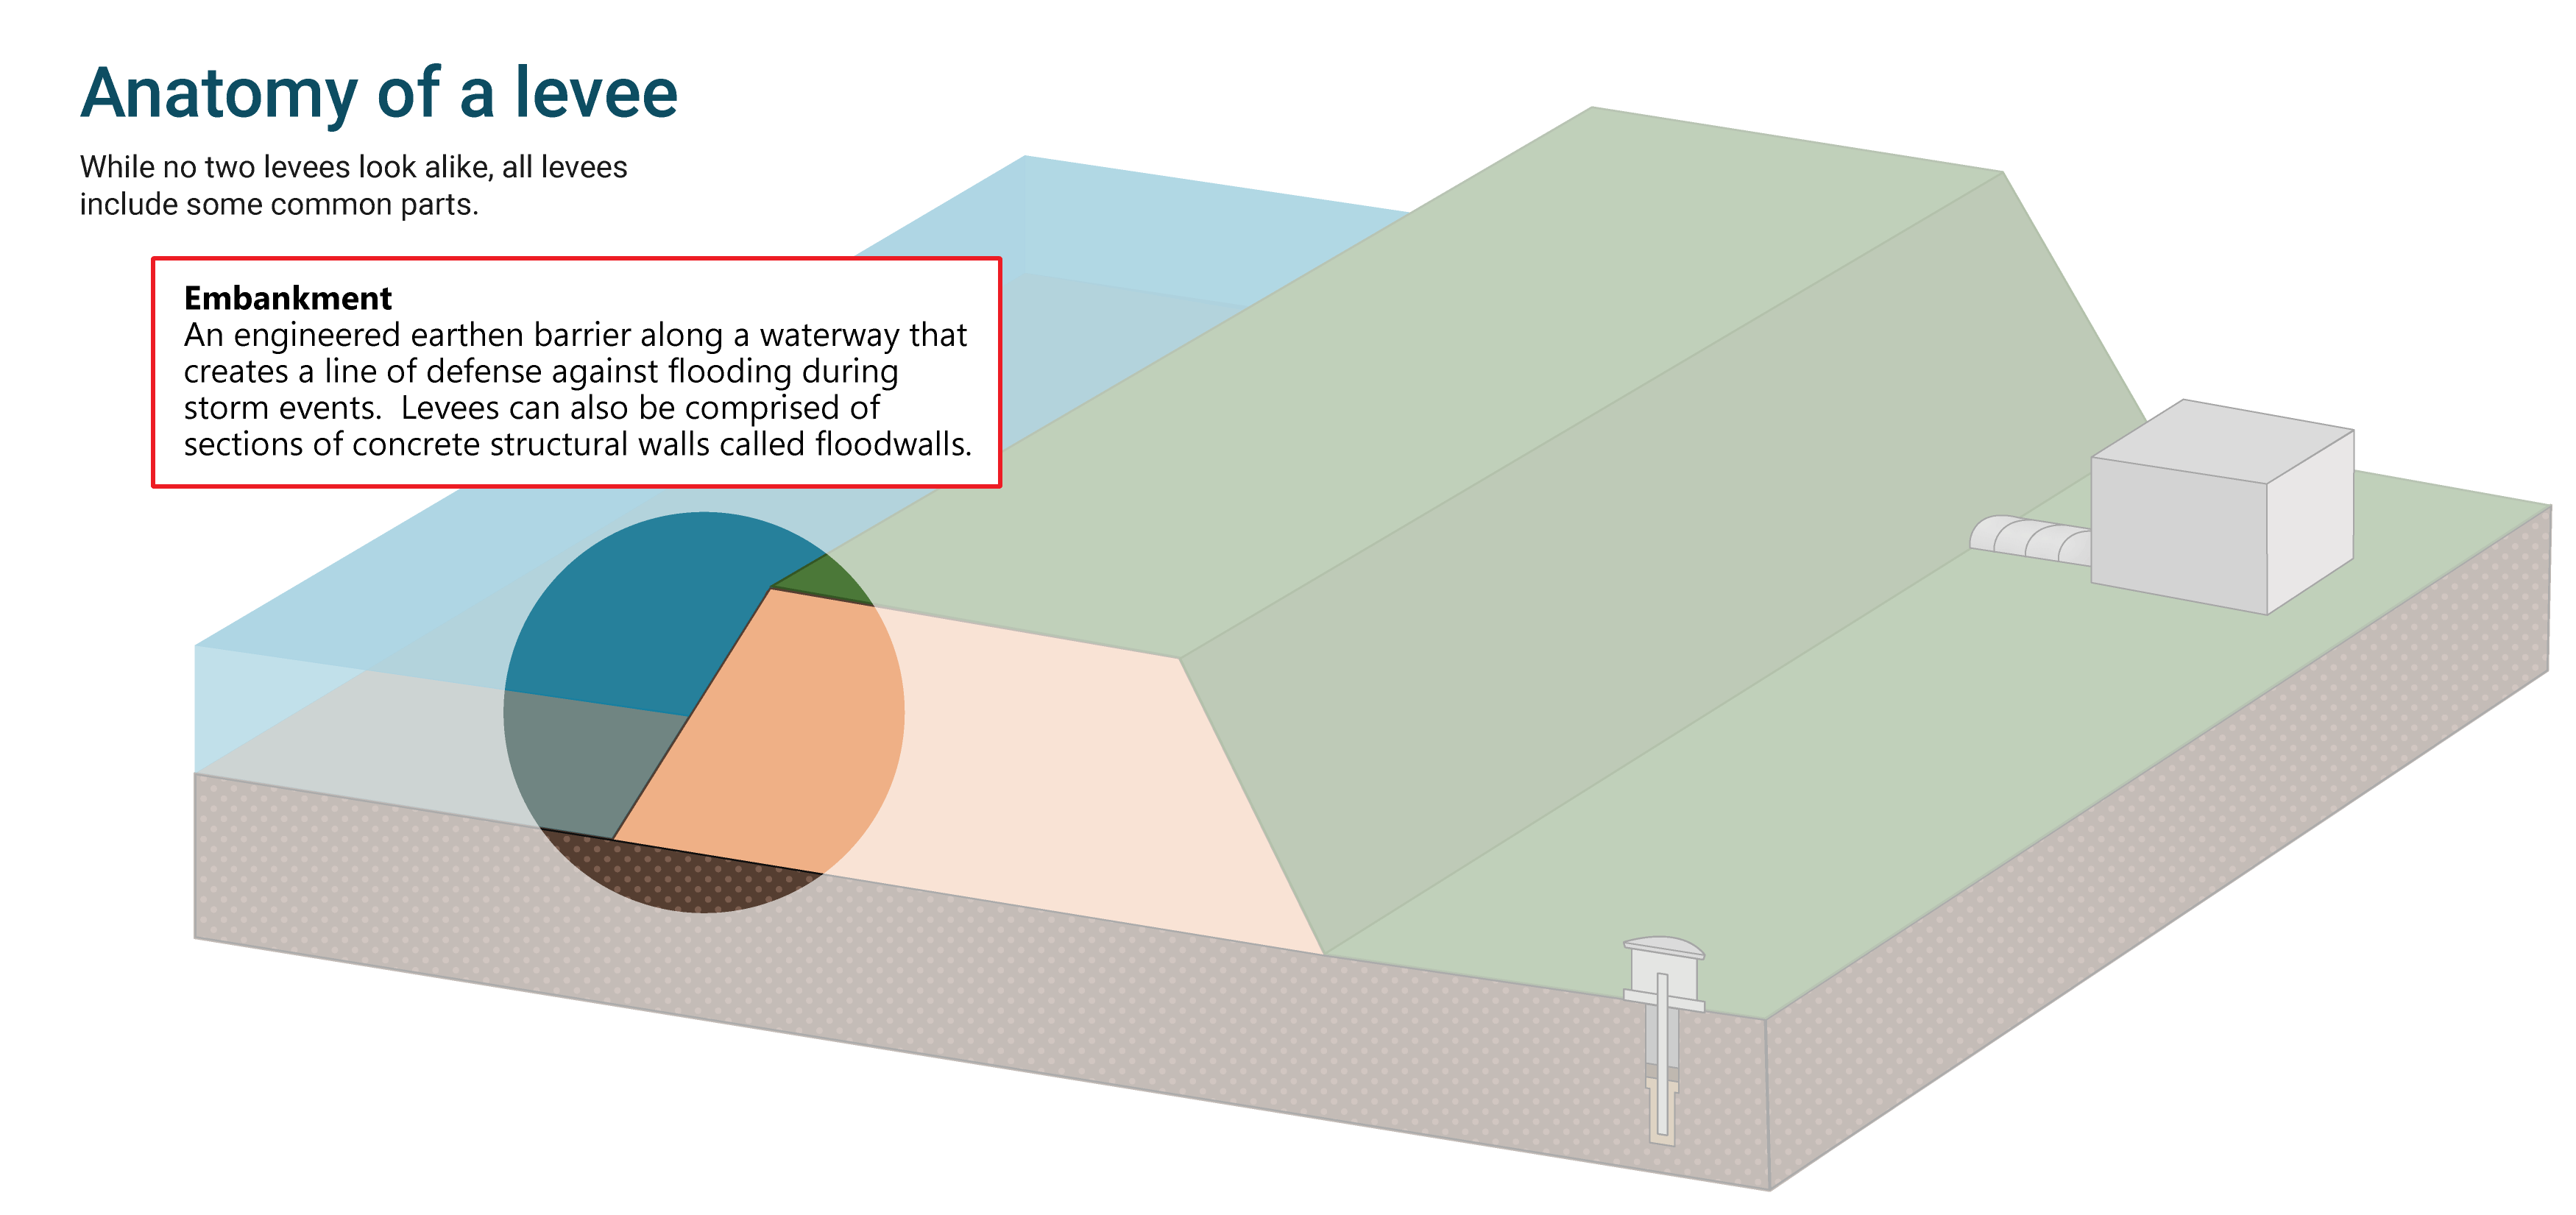 Diagram of a levee system's basic parts - Embankment